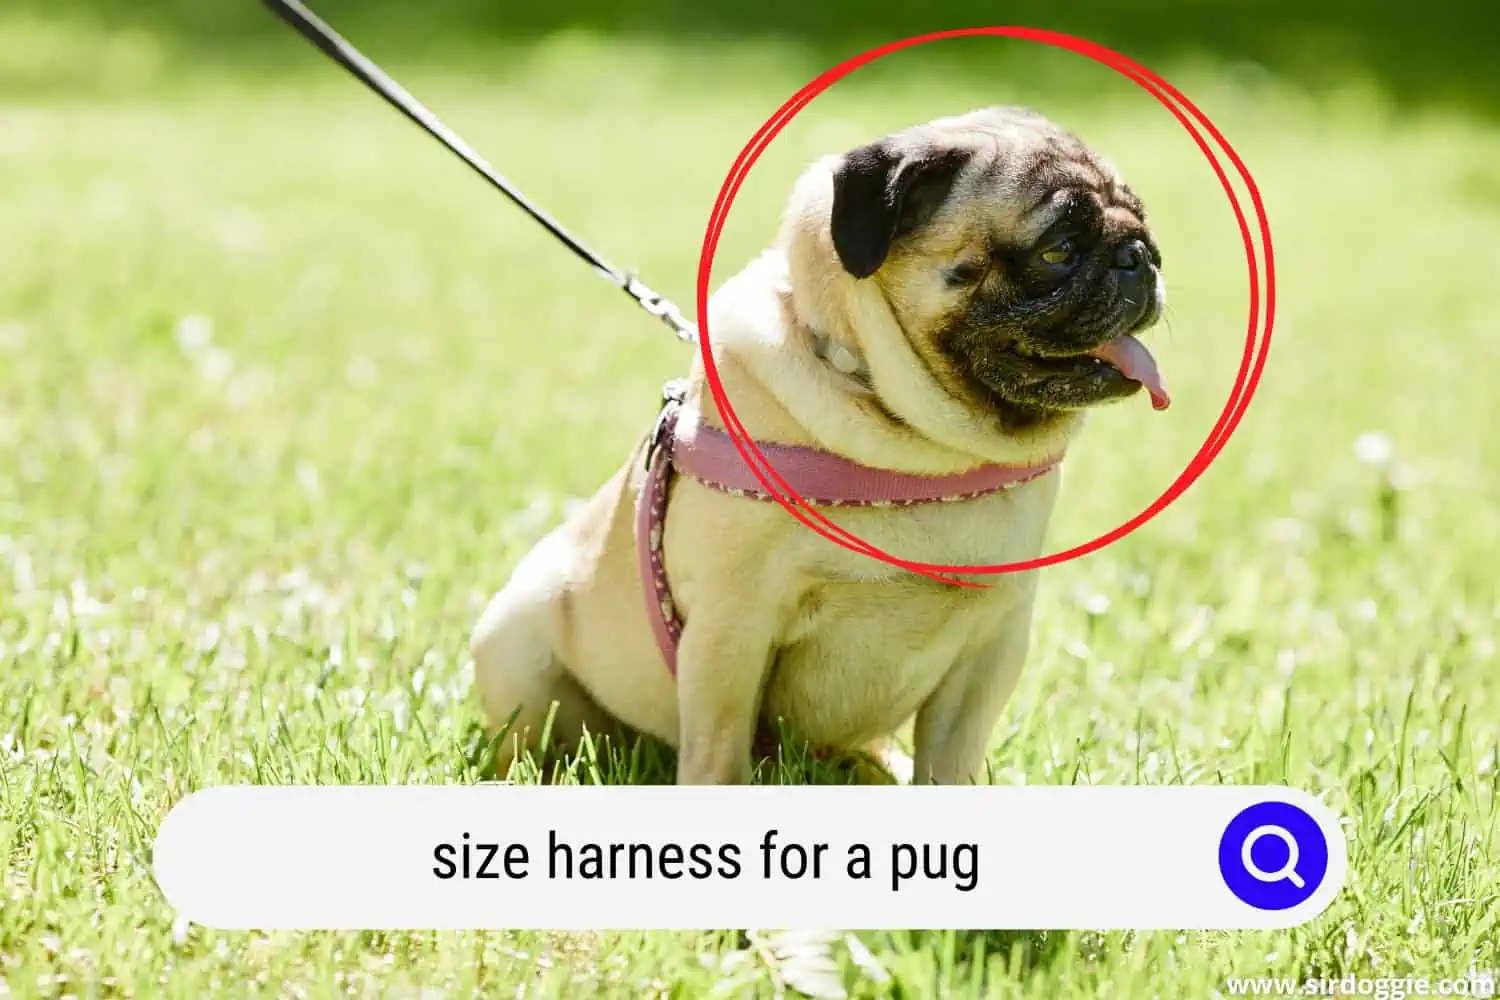 size harness for a pug